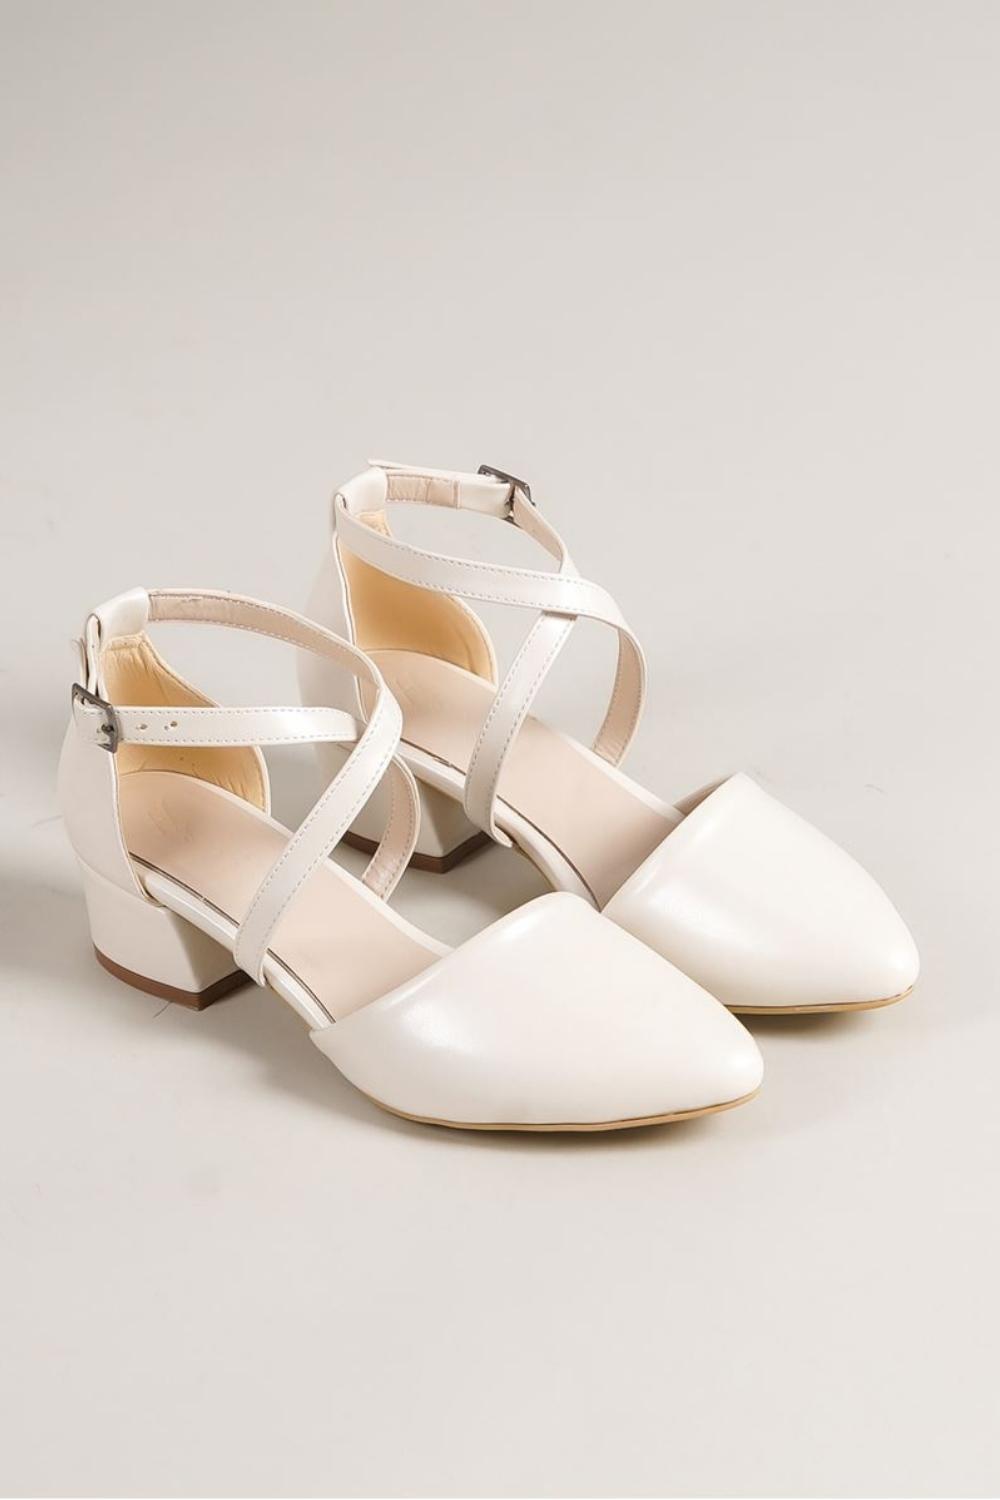 Letha White Pearl Detailed Heeled Women's Shoes - STREETMODE™